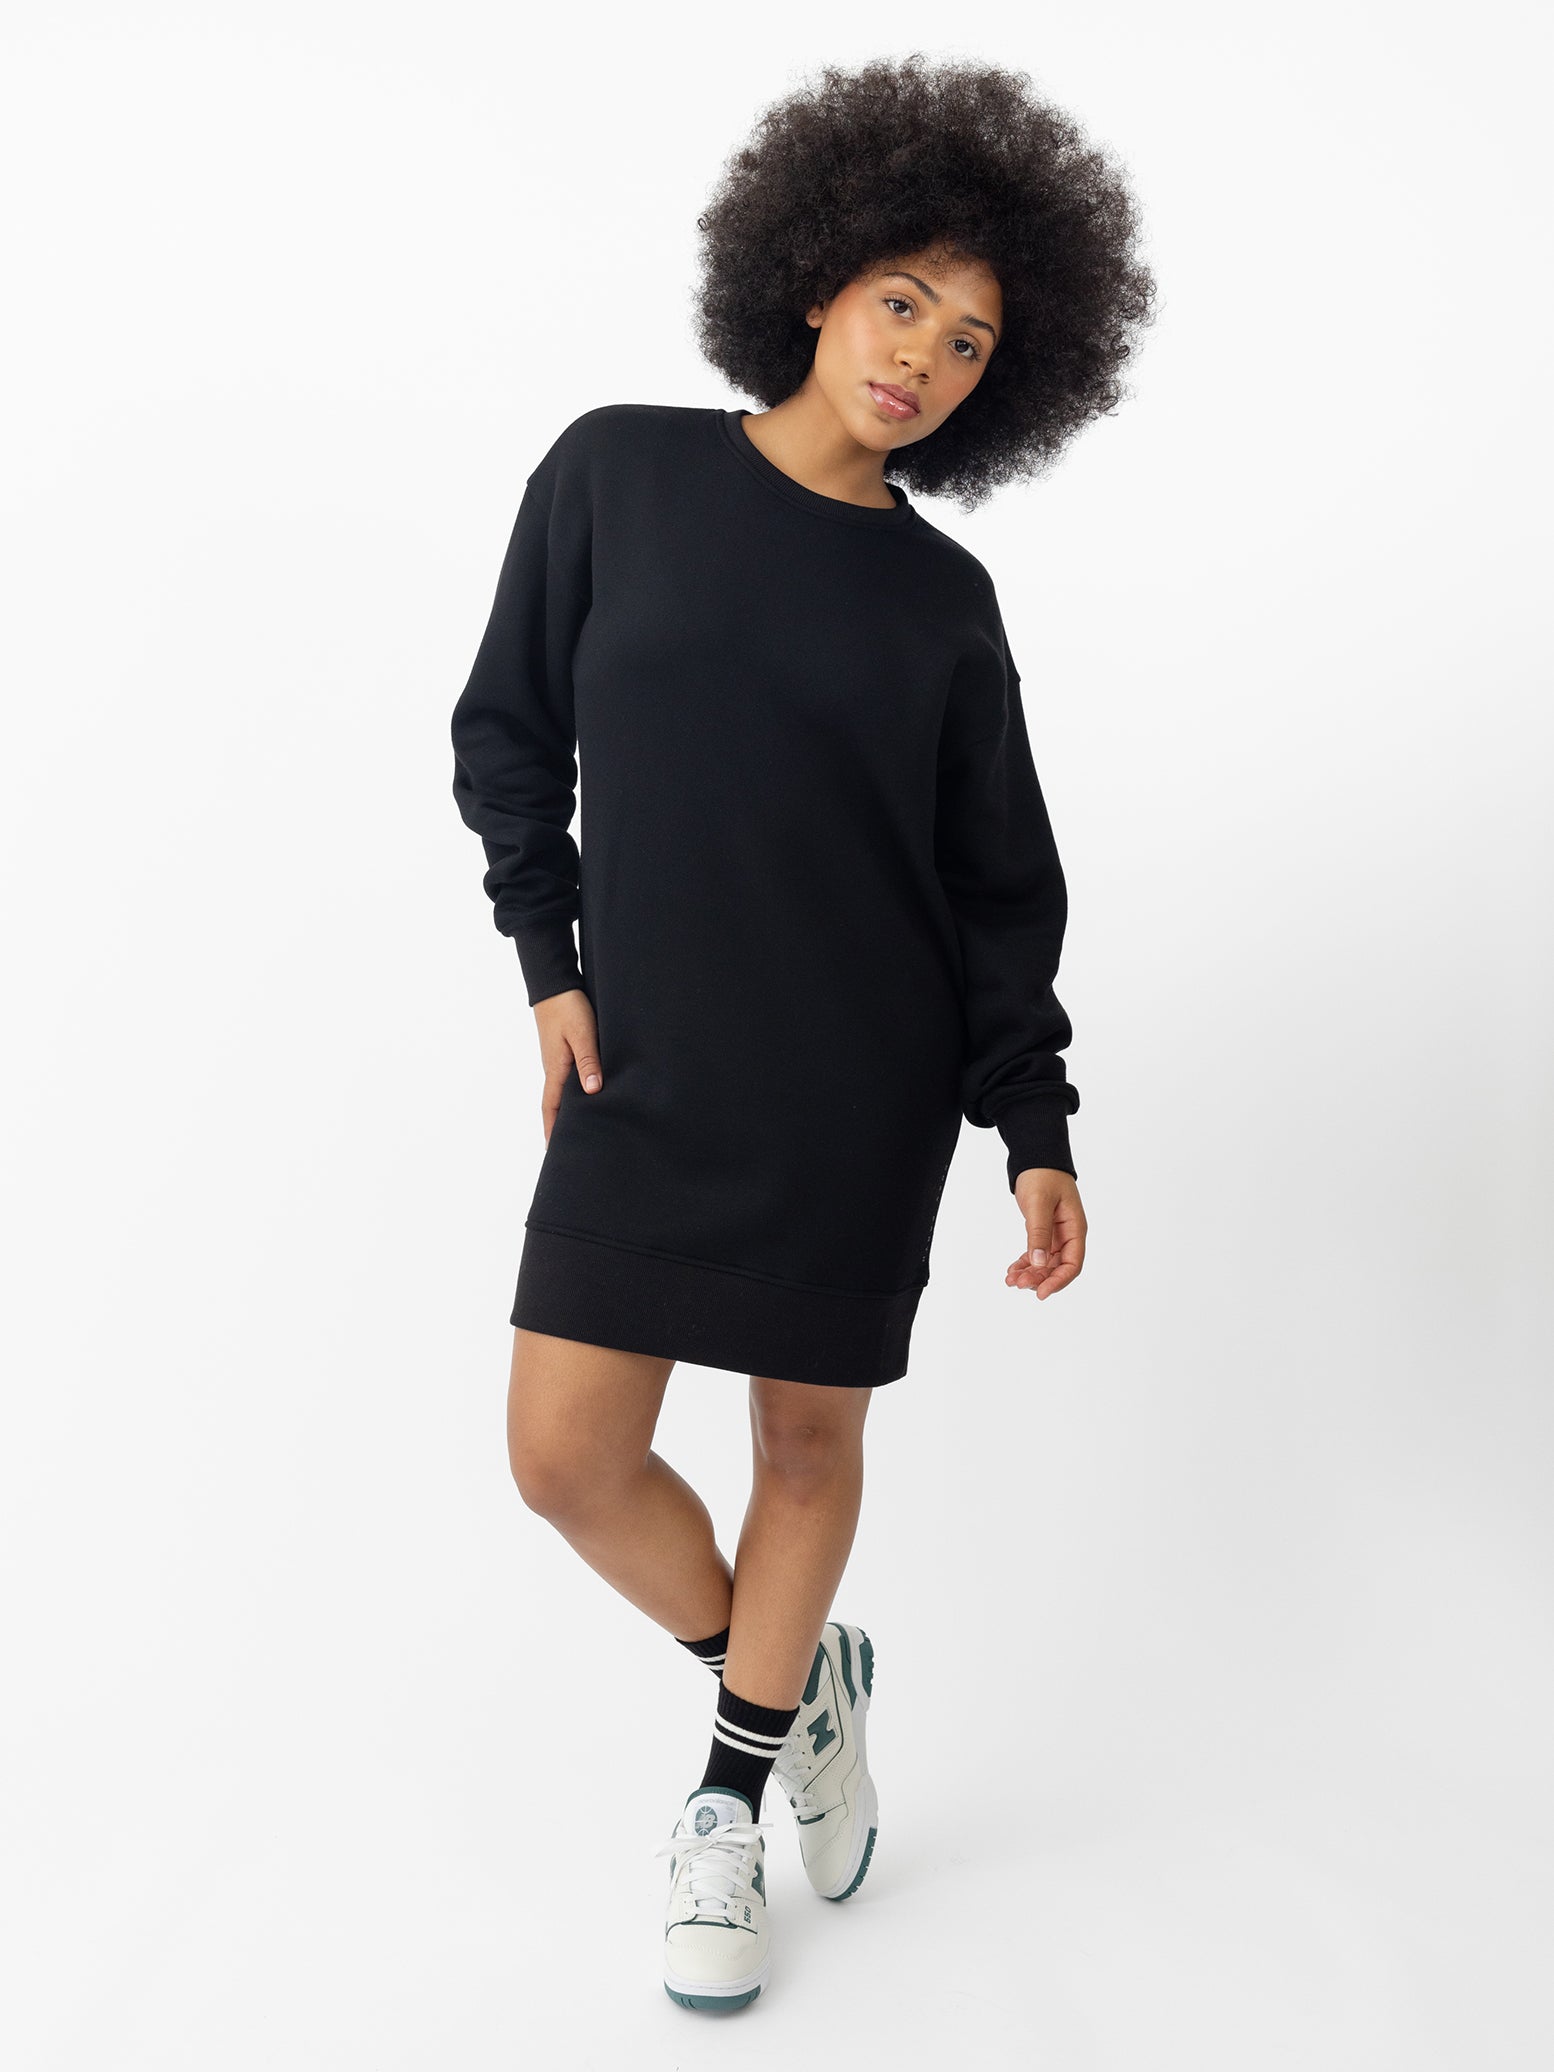 Woman wearing Black CityScape Crewneck Dress with white background |Color: Black